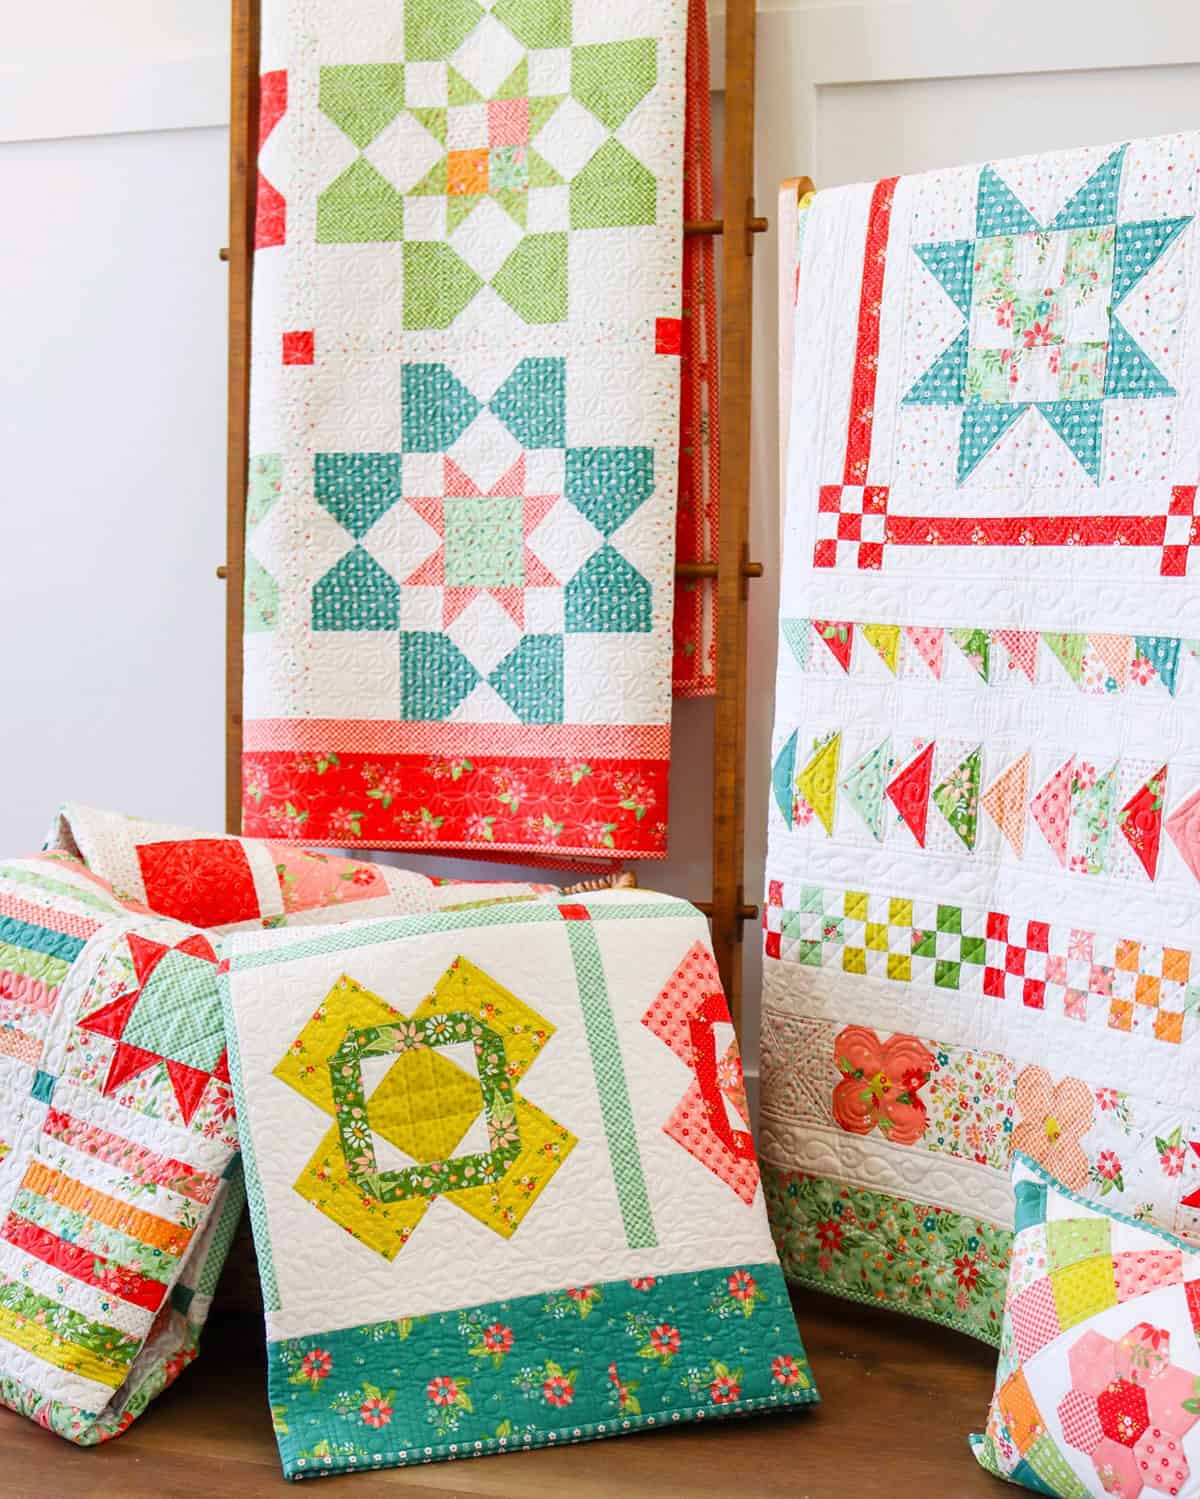 quilts on ladders and in a basket with brightly colored fabrics